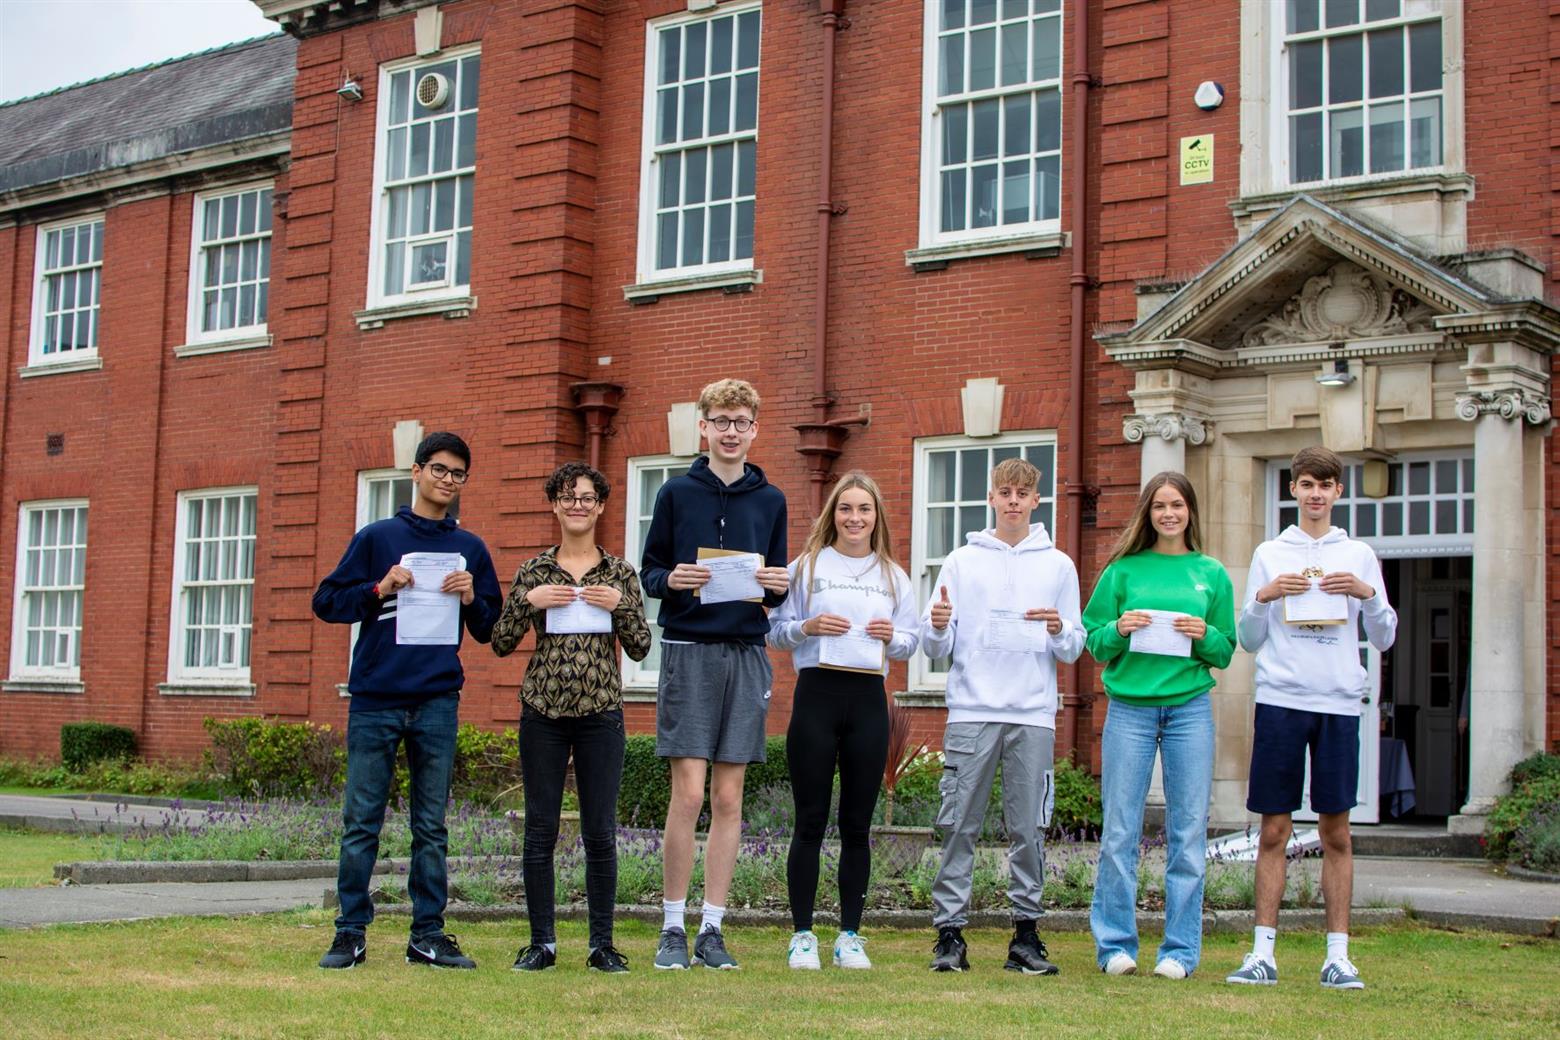 Another stellar set of GCSE results at AKS Lytham